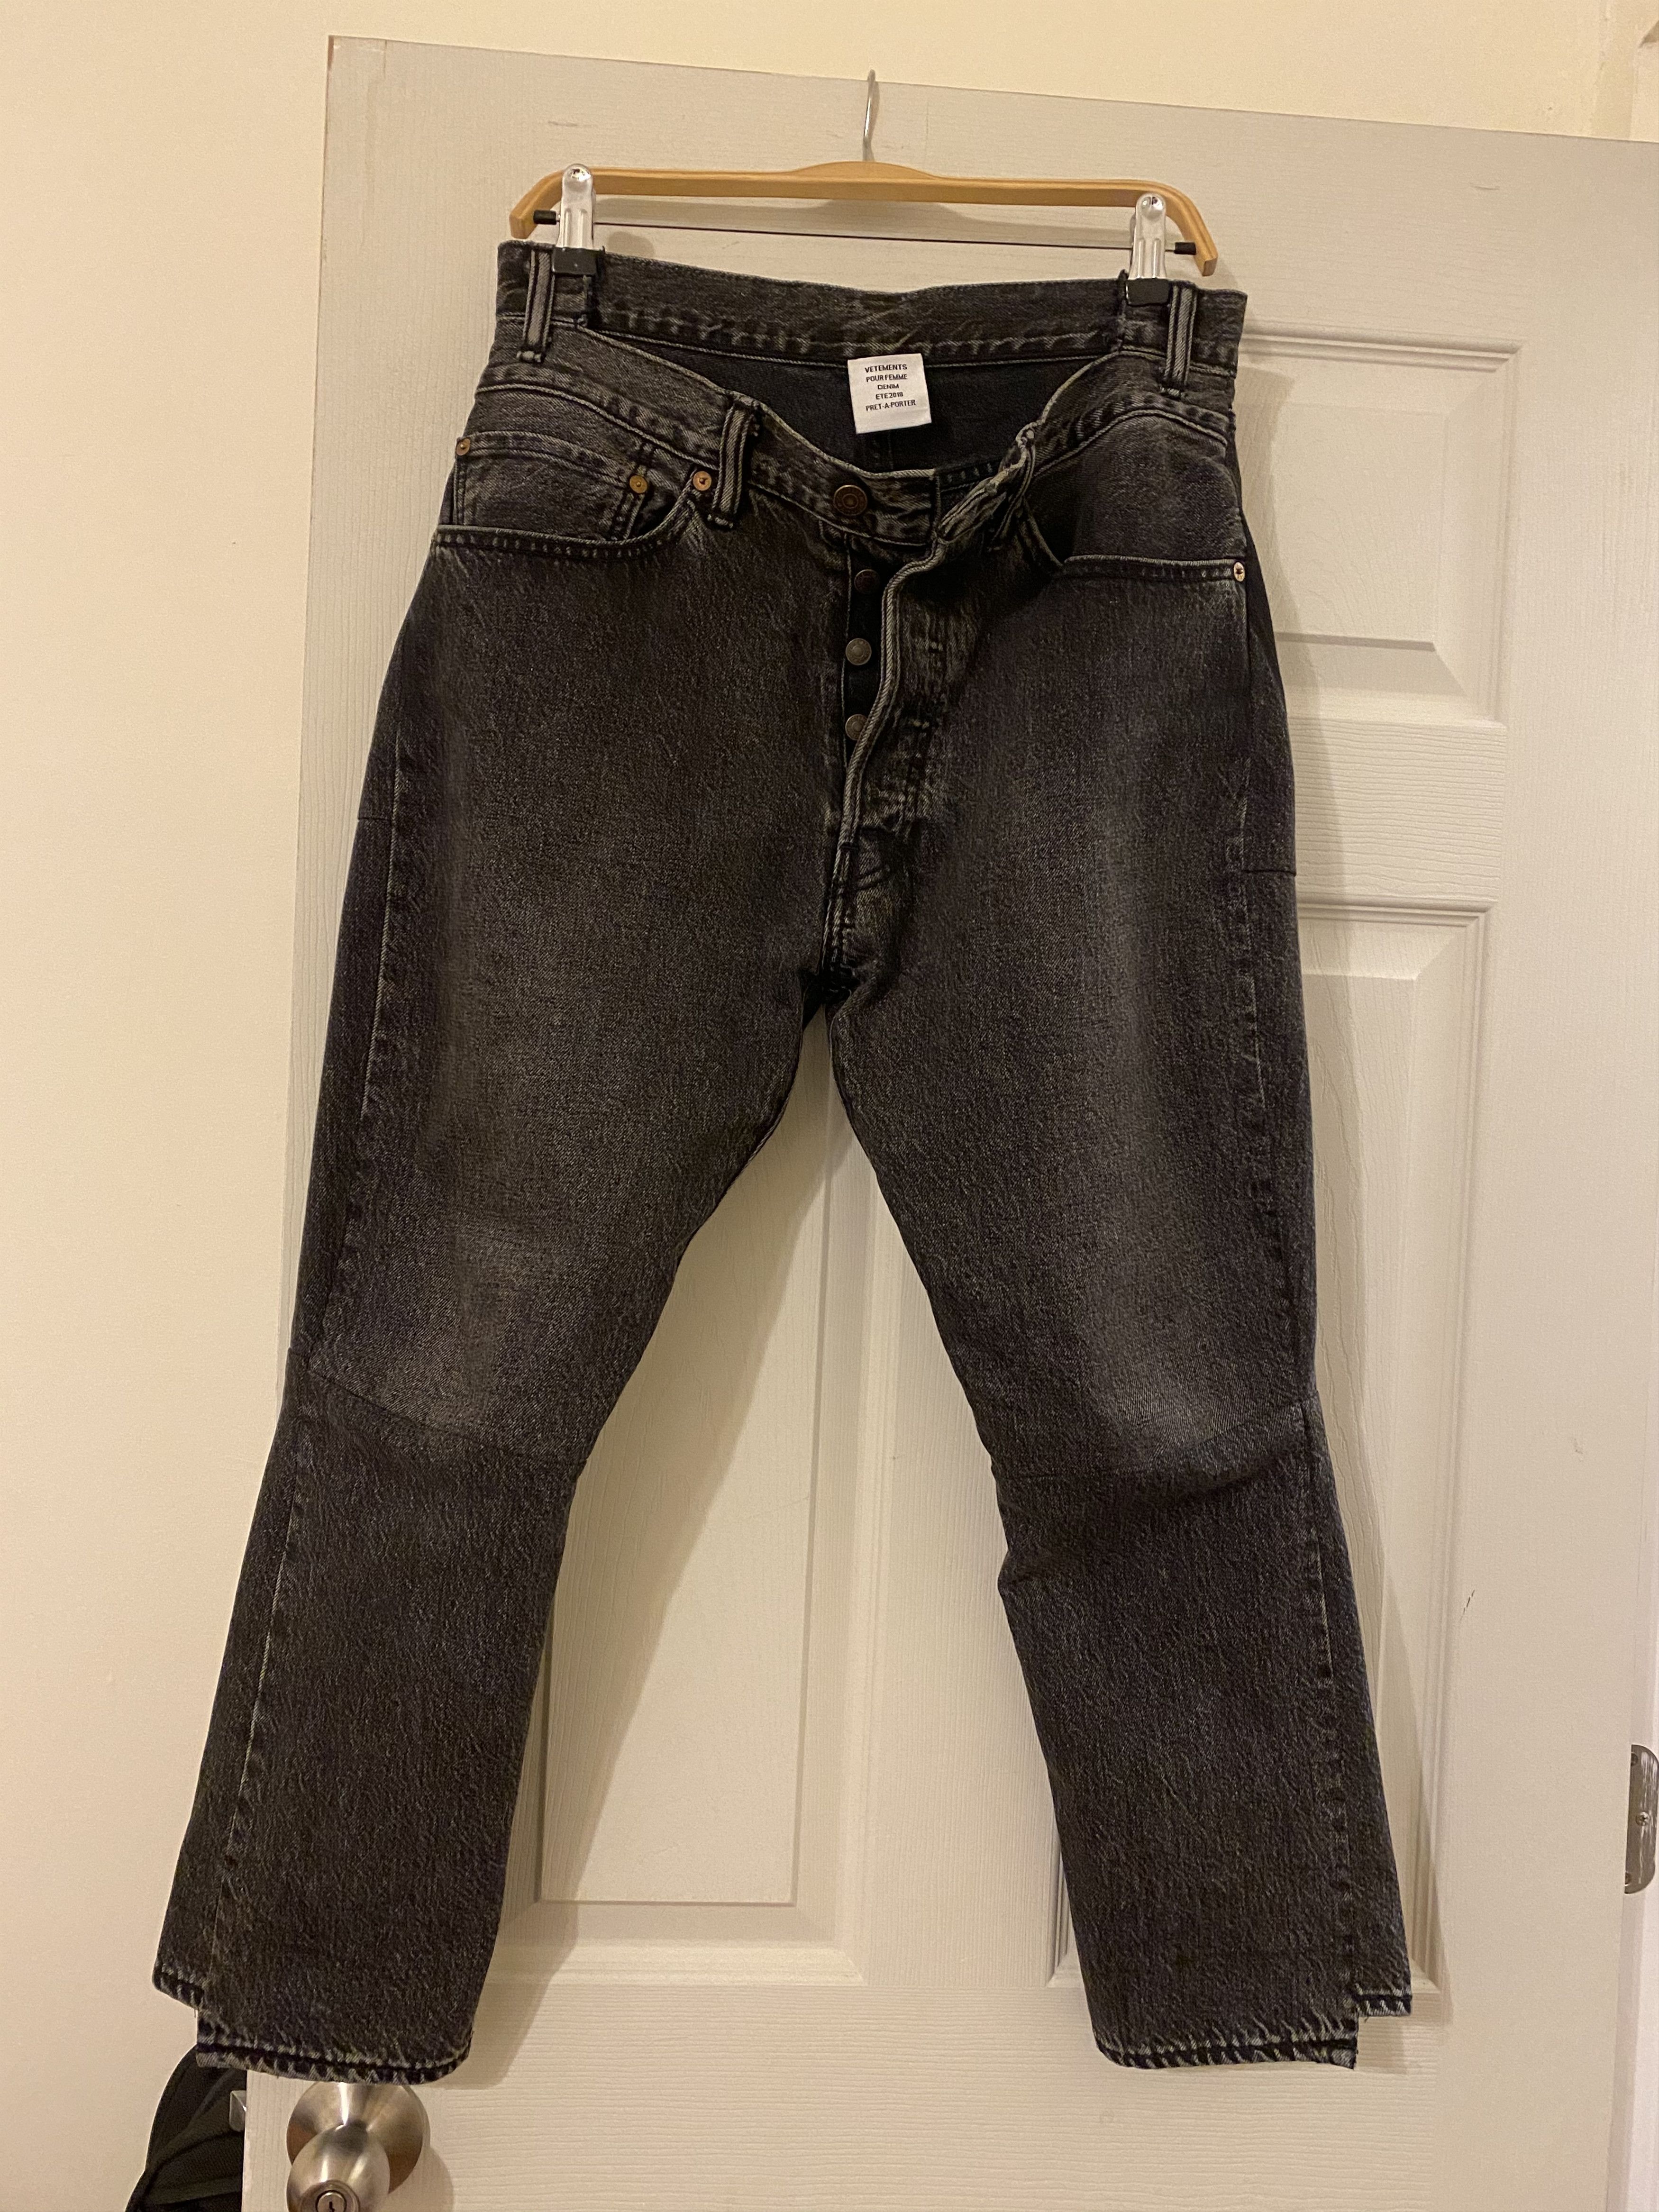 Levi's Vetements High Waisted Reworked Levis | Grailed